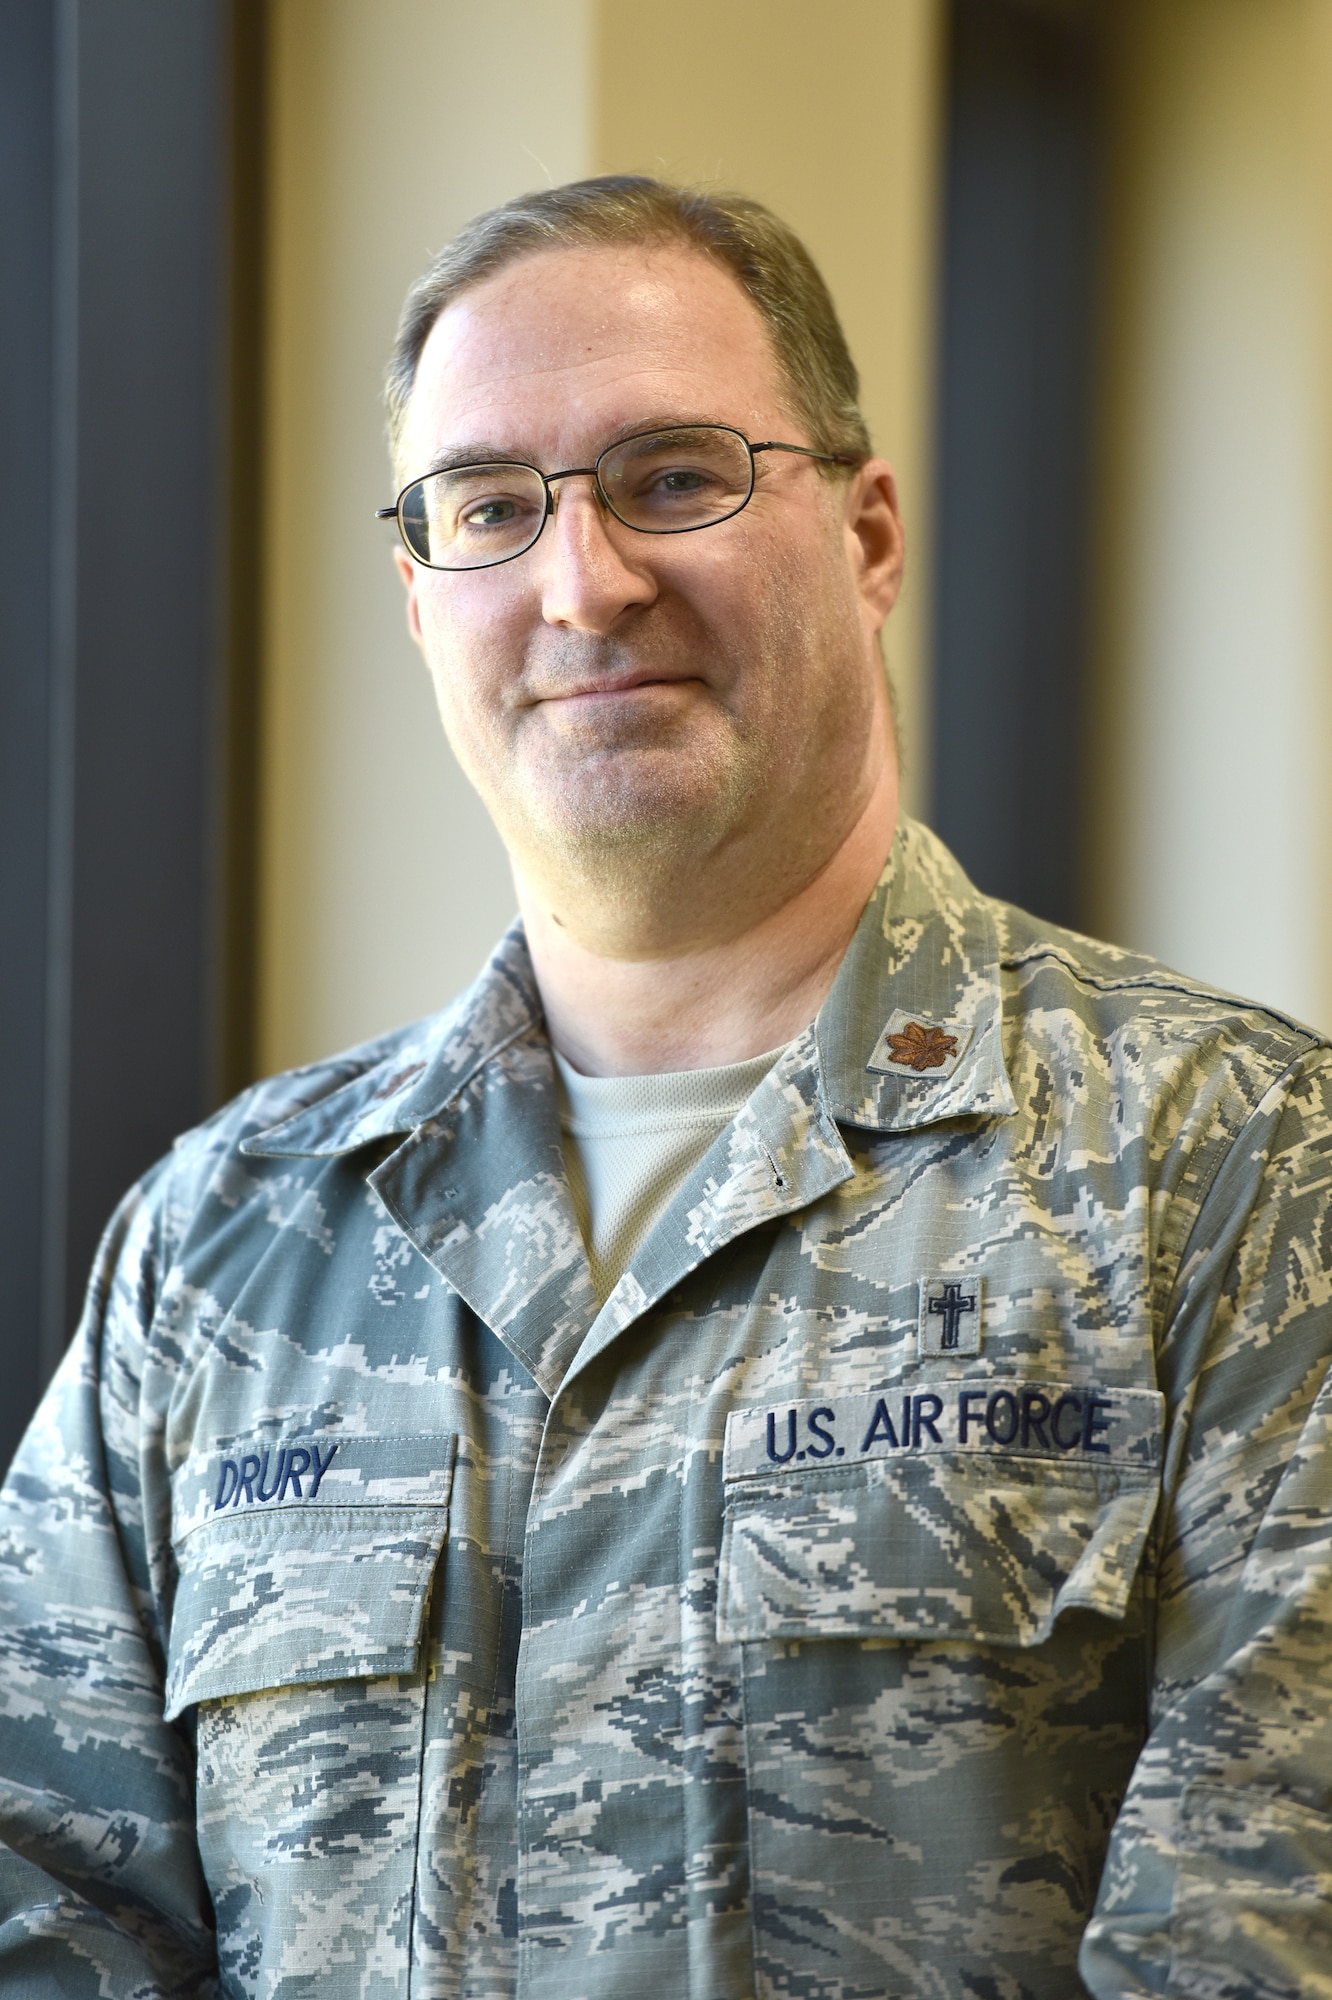 Maj. Peter Drury, a chaplain with the 180th Fighter Wing, Ohio Air National Guard poses for a photo during annual training in Alpena, Michigan.